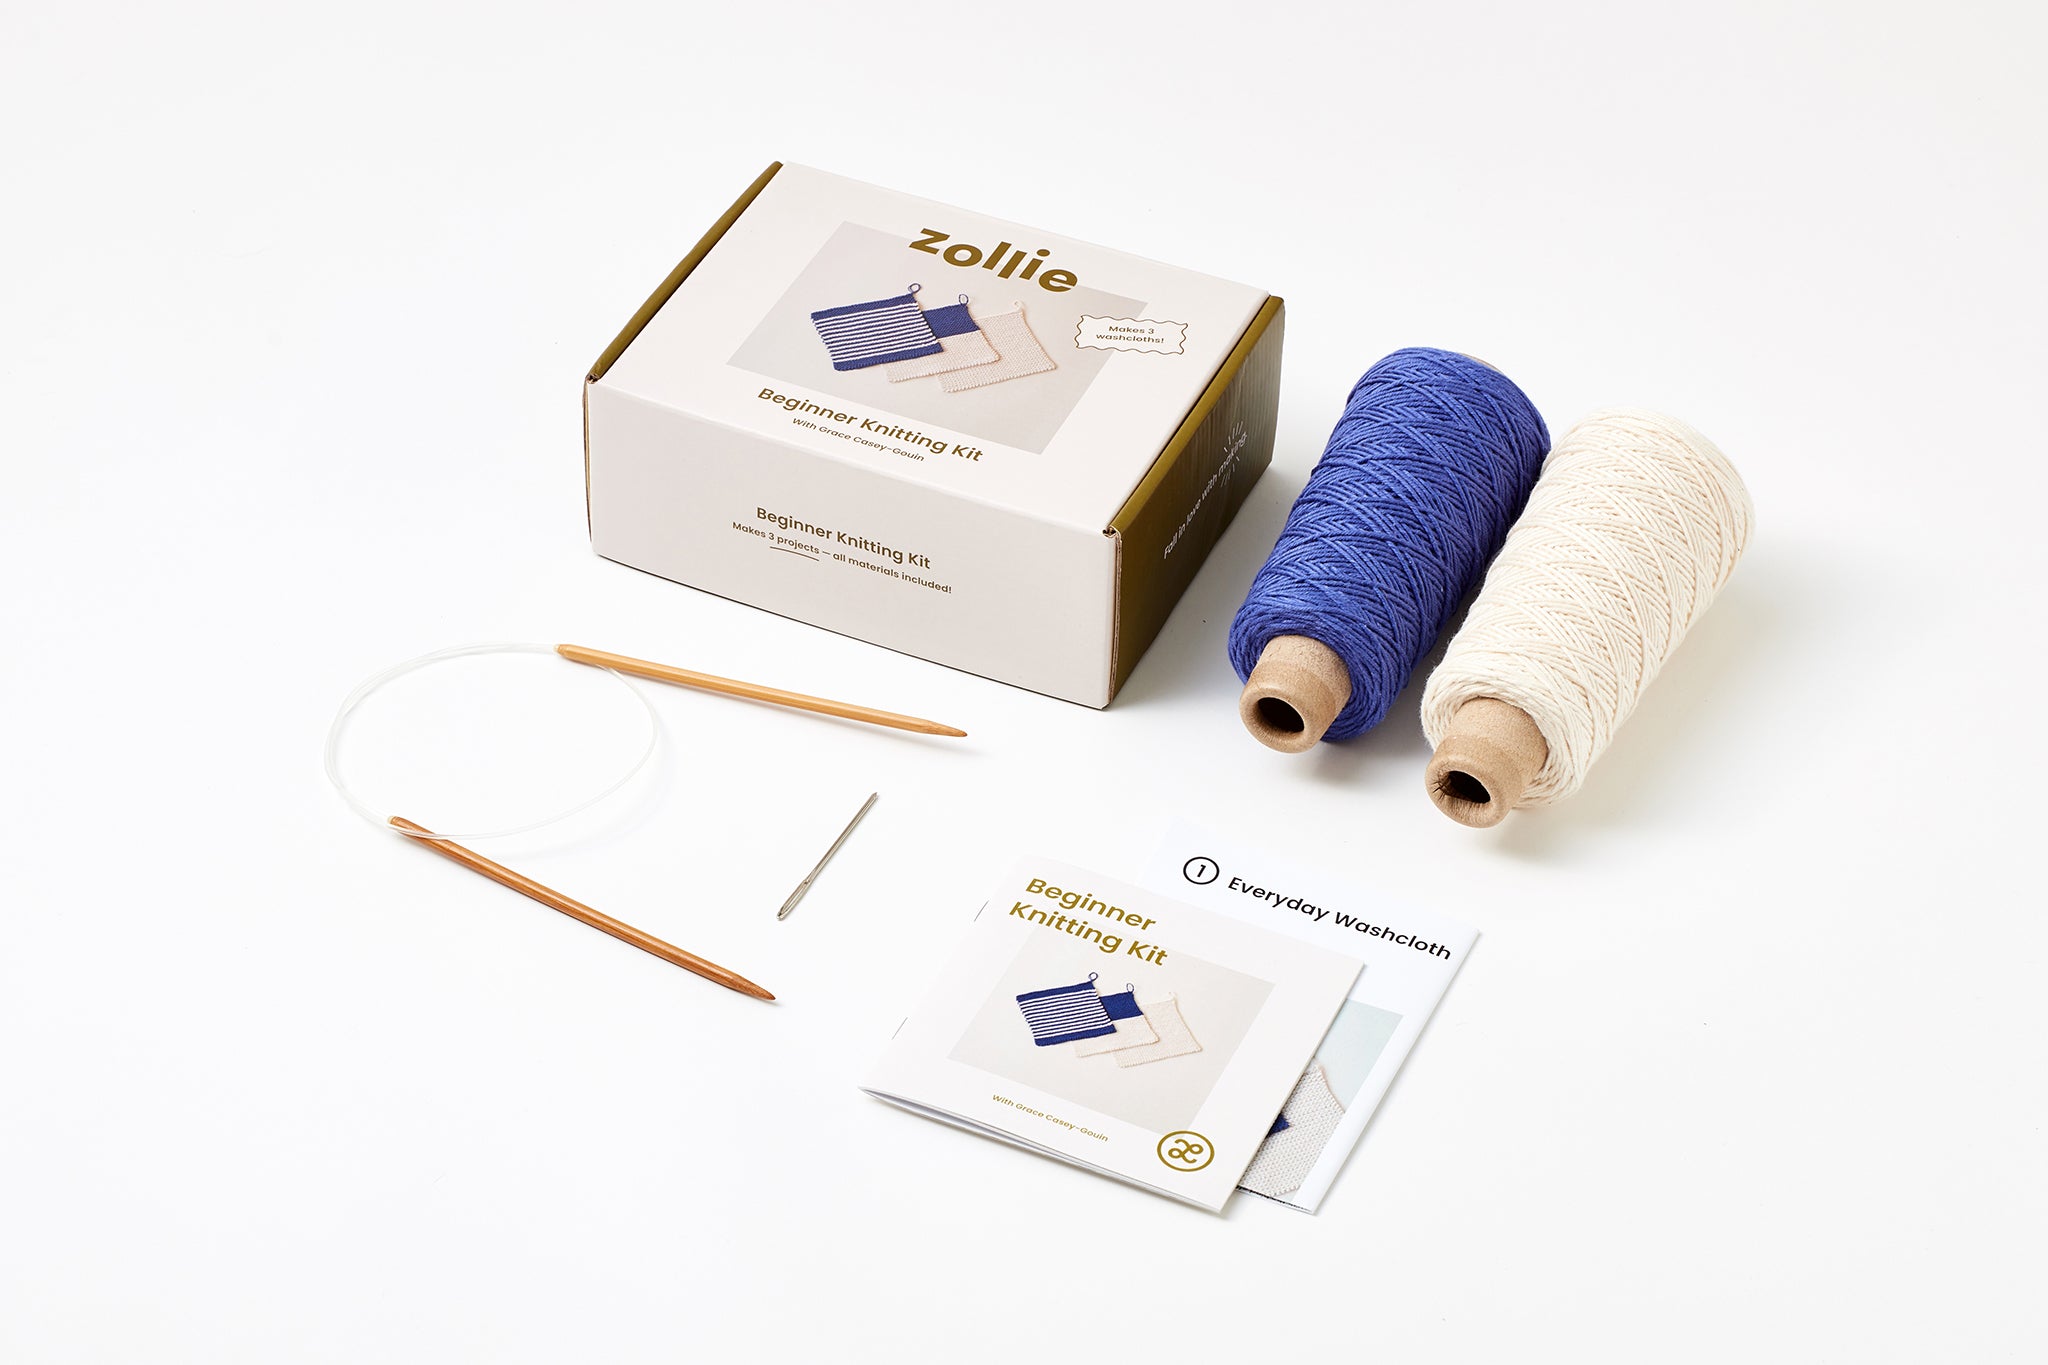 Beginners Knitting Kit Learn how to Knit Everything Included Easy &  Gorgeous !